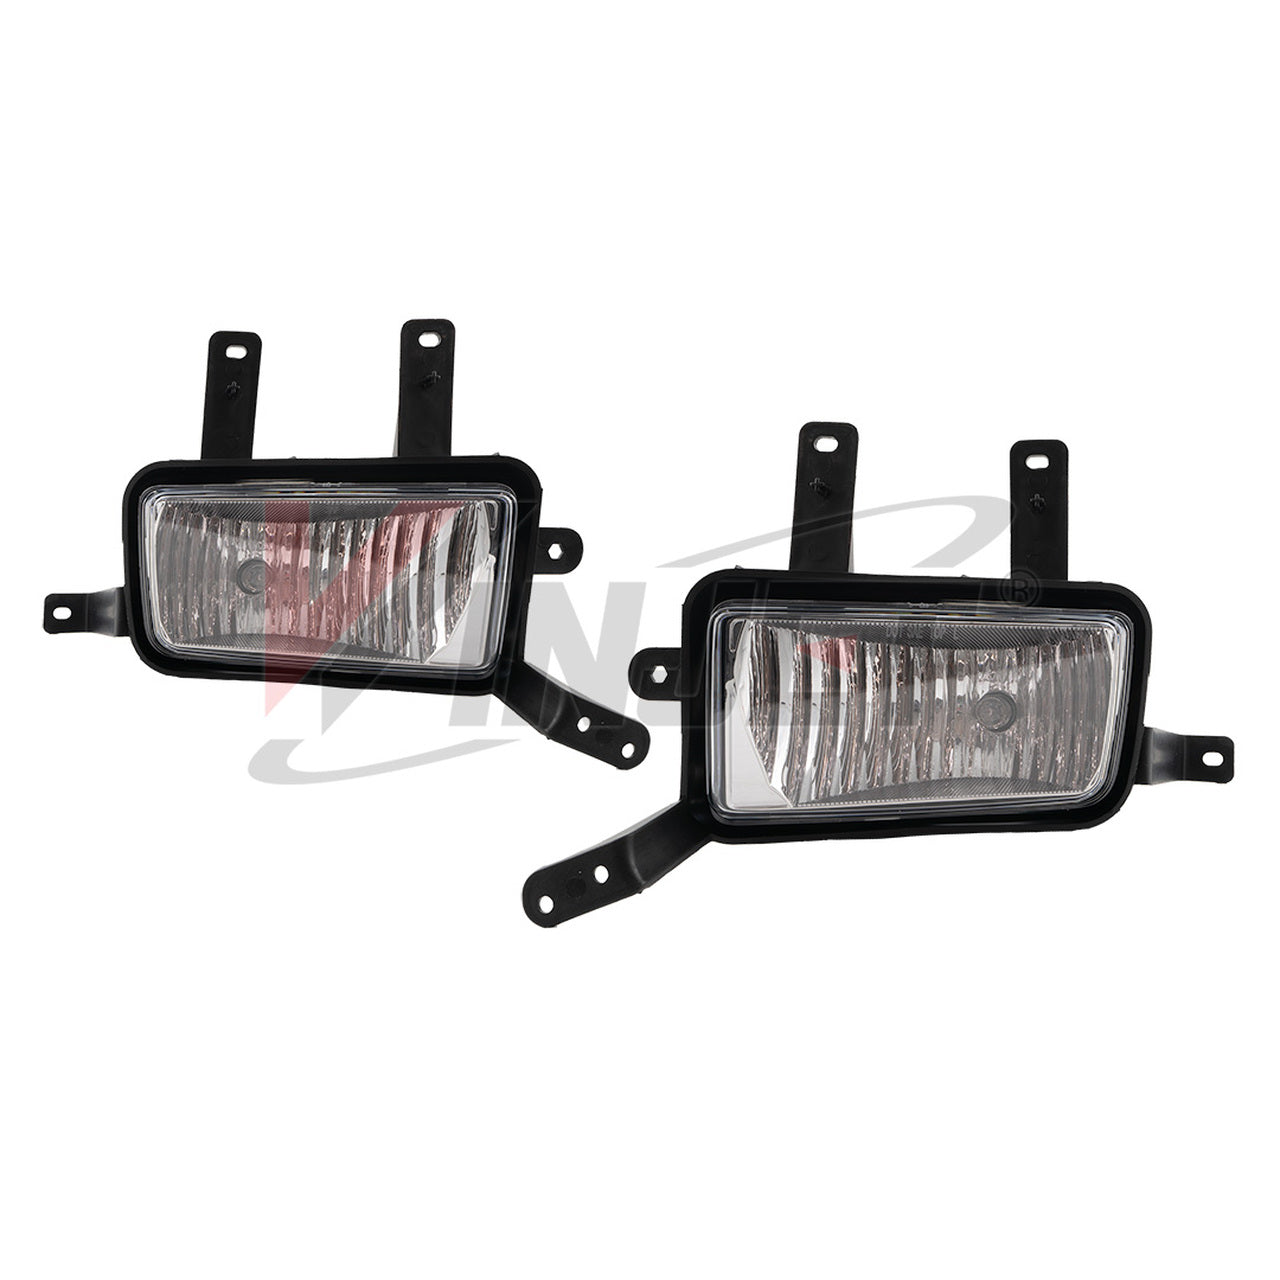 Winjet 2014-2016 Chevrolet Suburban Tahoe Clear Fog Light Full Kit Wiring Switch and Bezels Included WJ30-0512-09